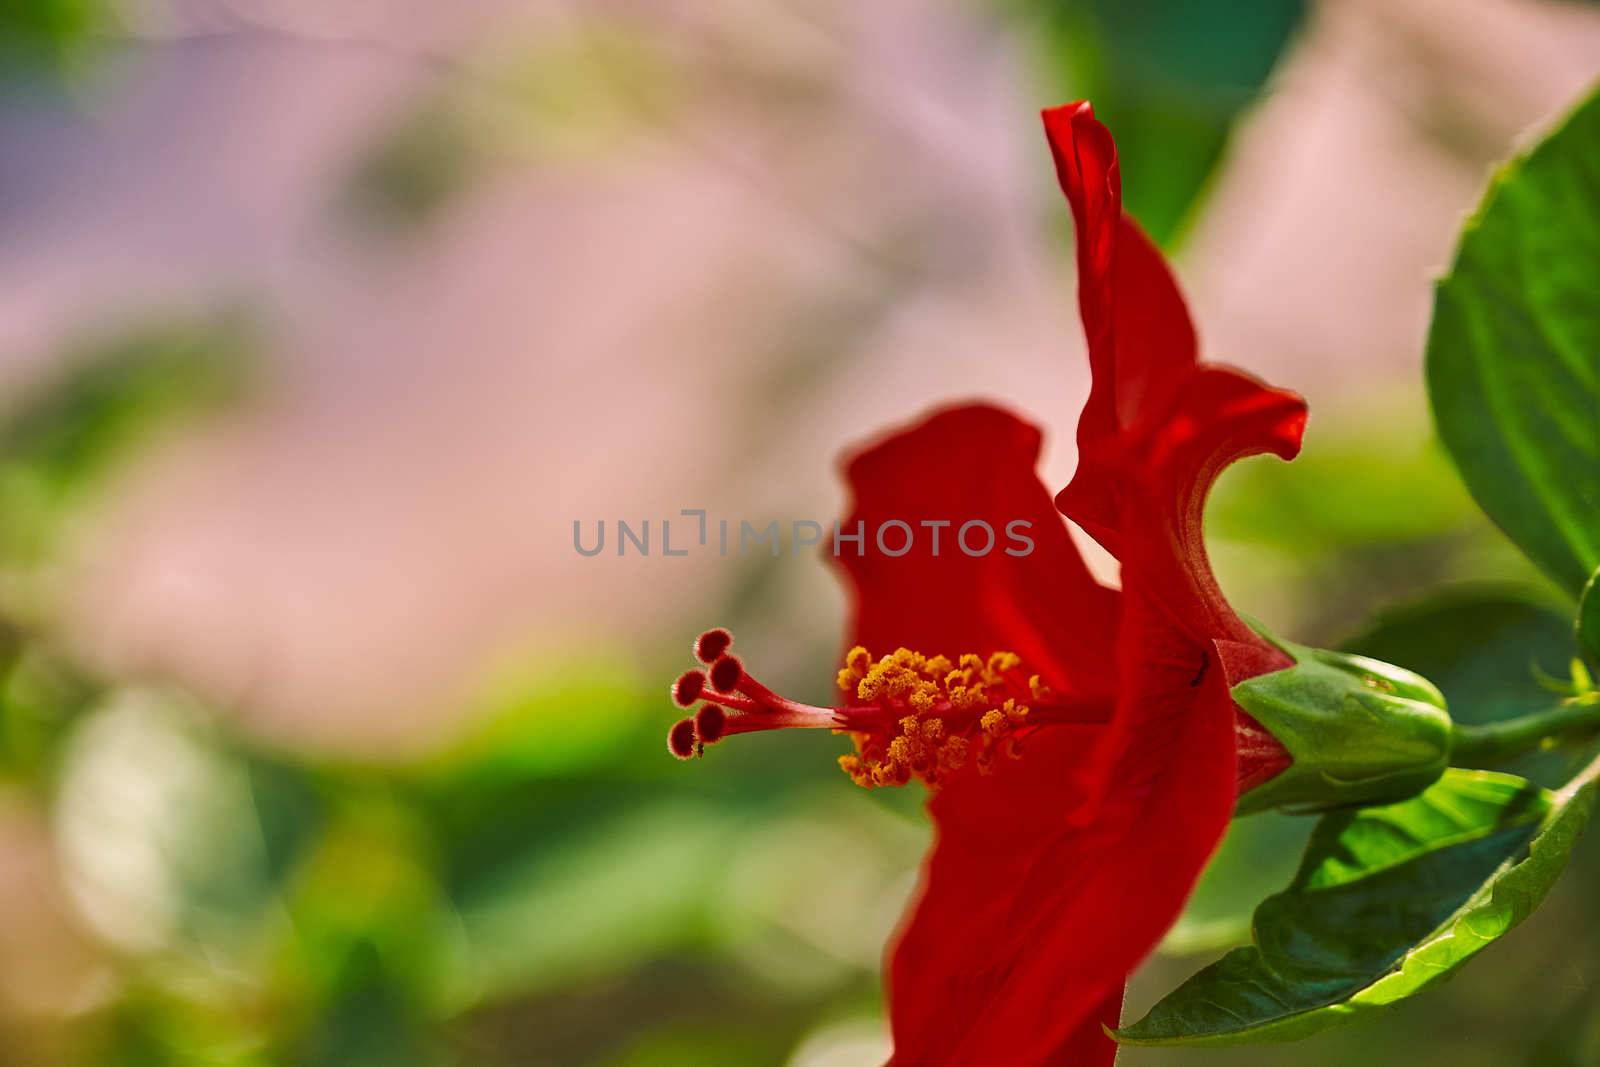 Red Hibiscus flowers China rose,Chinese hibiscus,Hawaiian hibiscus in tropical garden of Tenerife,Canary Islands,Spain.Floral ba. Ckground.Selective focus by peerapixs